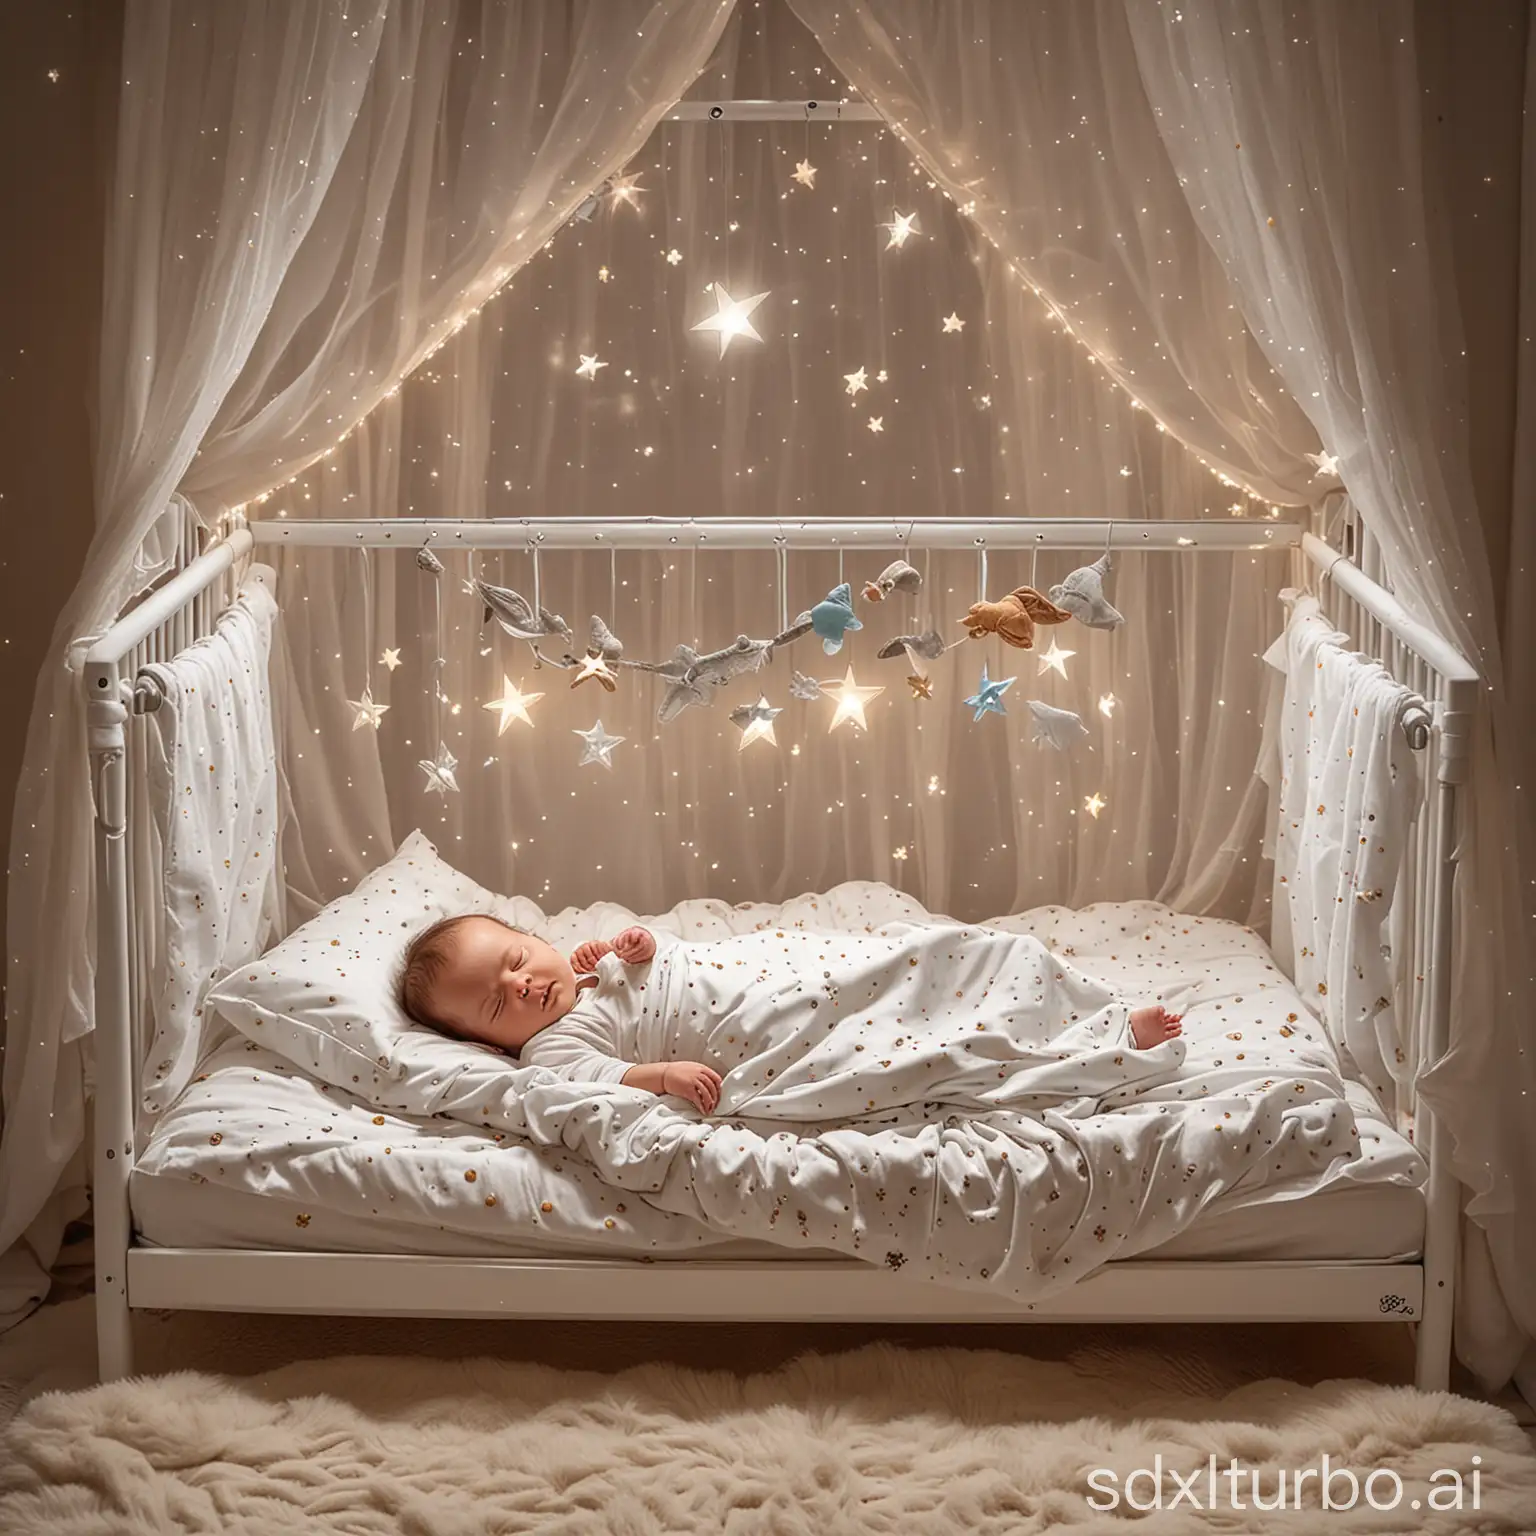 Dreamy-Baby-Astronaut-in-Spaceship-Crib-Surrounded-by-Glowing-Stars-and-Planets